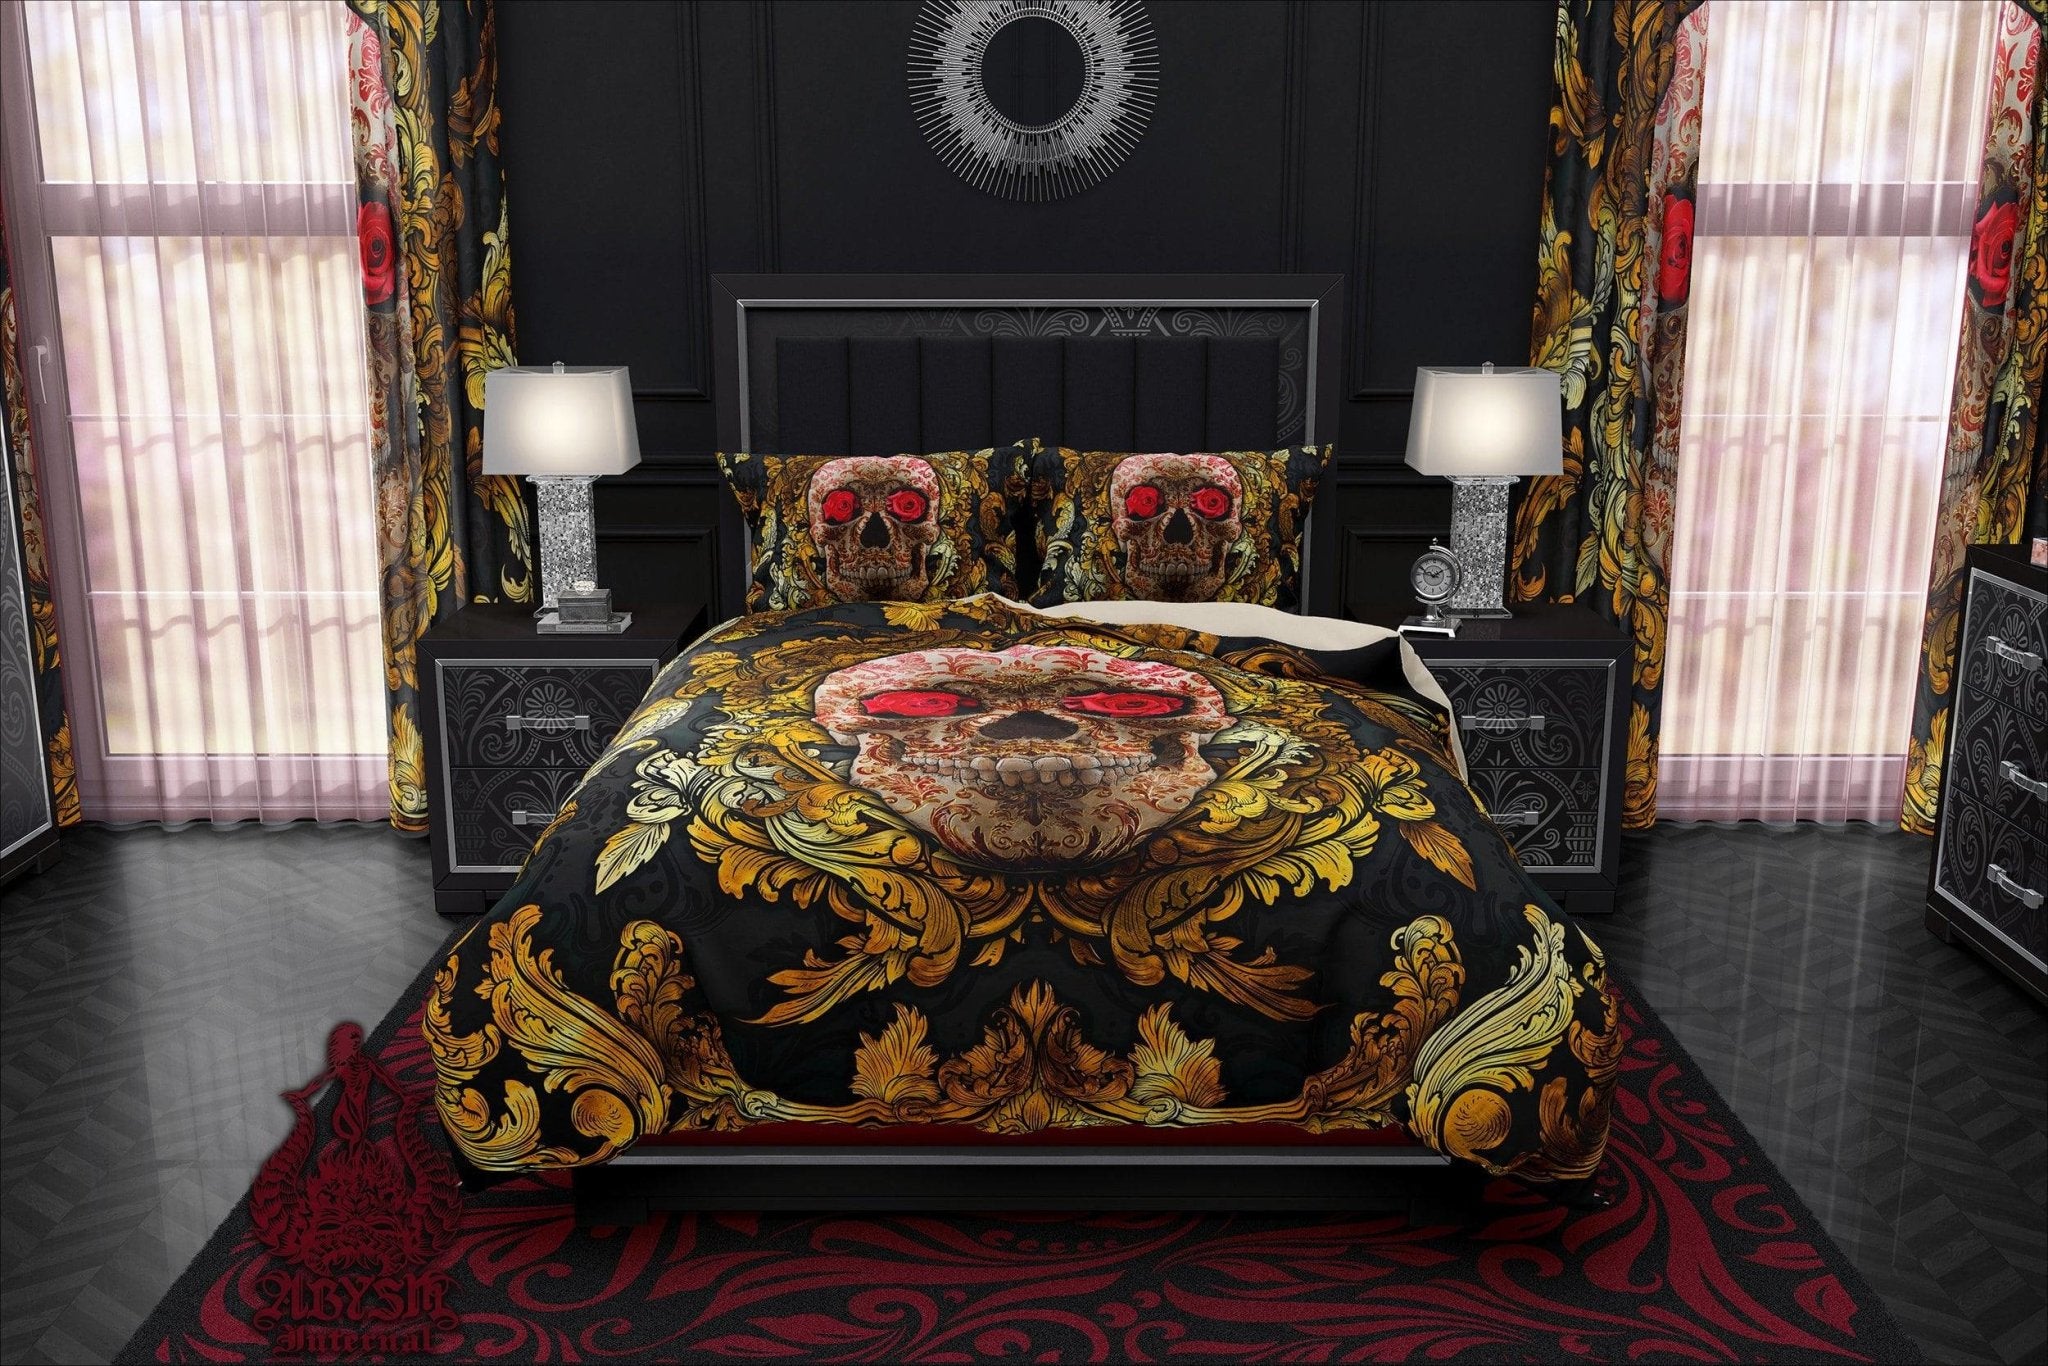 Skull Bedding Set, Comforter and Duvet, Victorian Gothic Bed Cover and Bedroom Decor, King, Queen and Twin Size - Gold and Red Roses - Abysm Internal